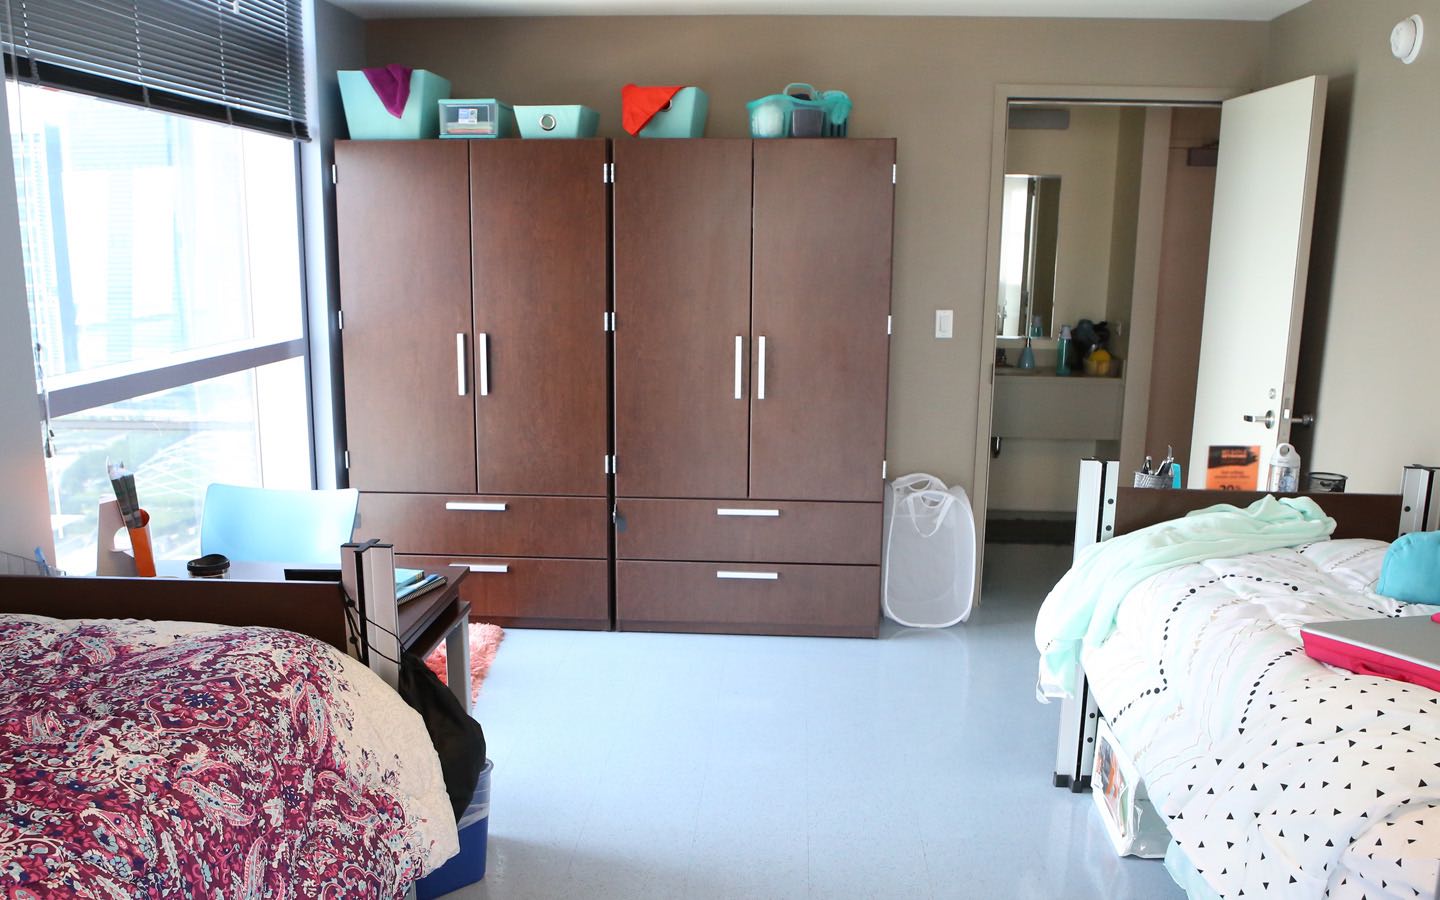 View of a double-occupancy dorm room featuring wardrobes and door to private restroom..